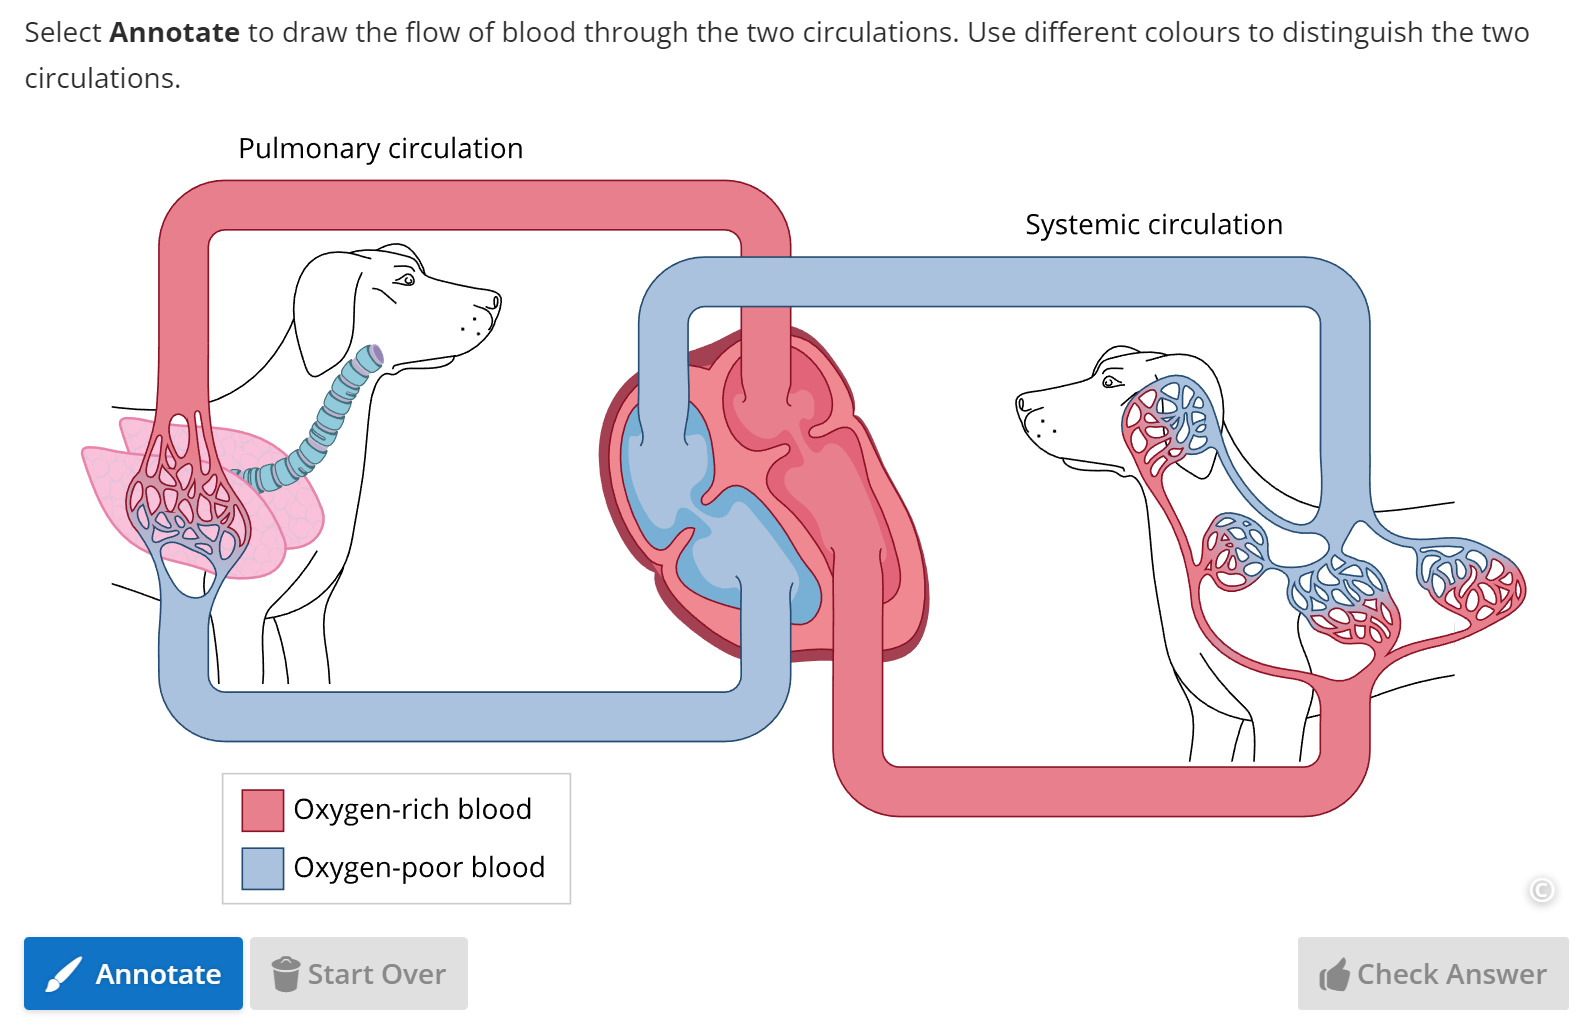 An example of an annotation question in which students have to draw the flow of blood through two circulations. The animal used as an example is a dog.